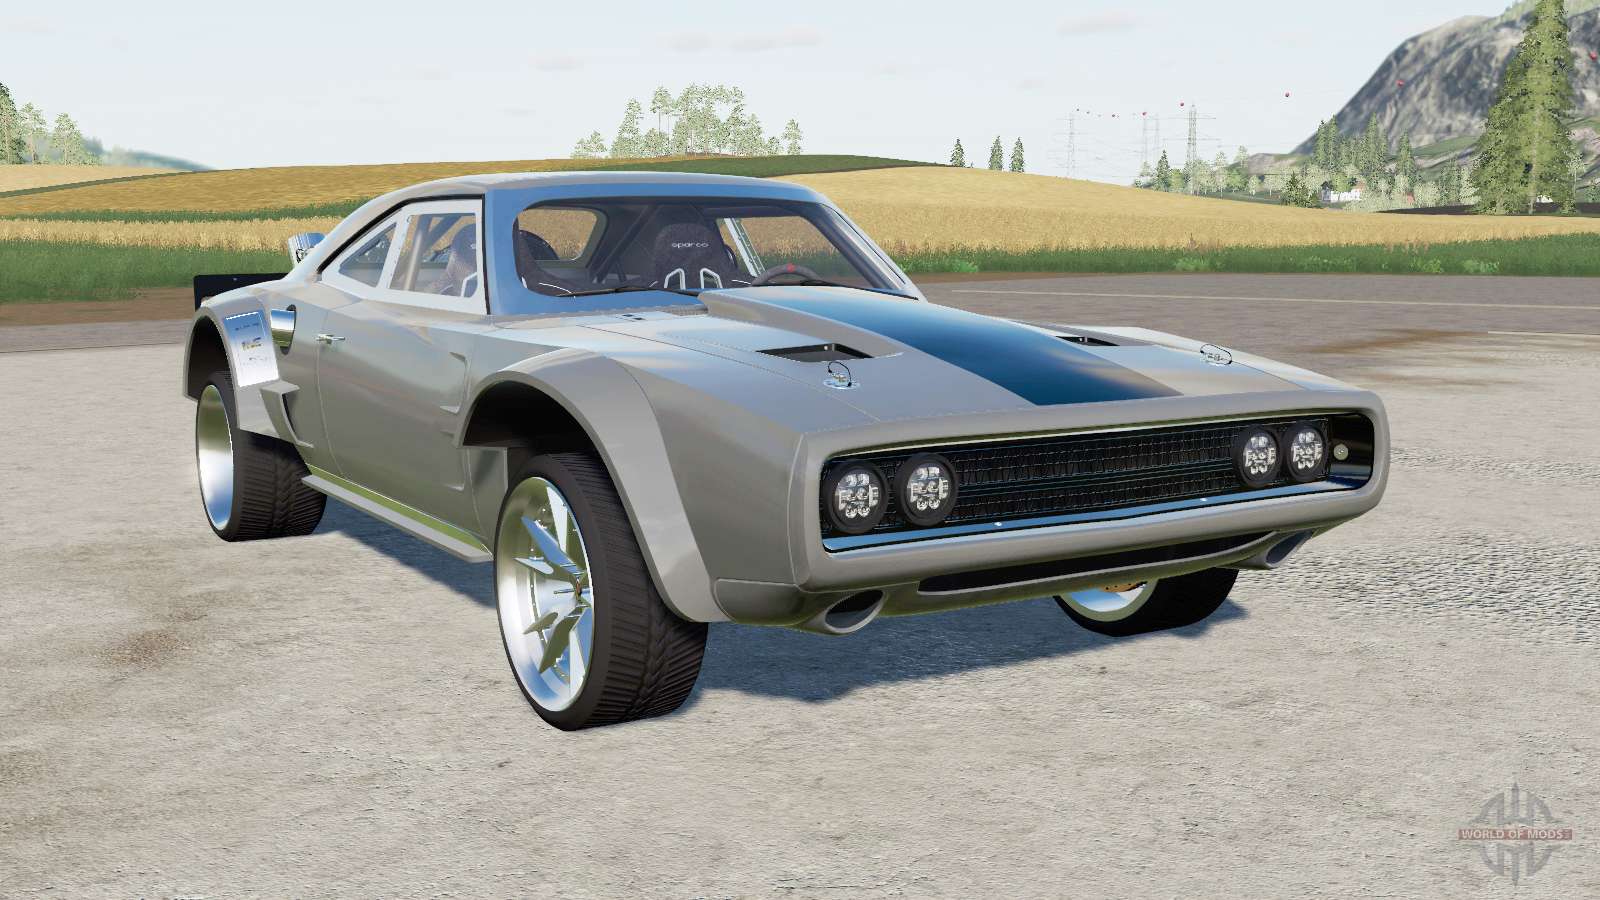 Dodge Ice Charger 1968 for Farming Simulator 2017